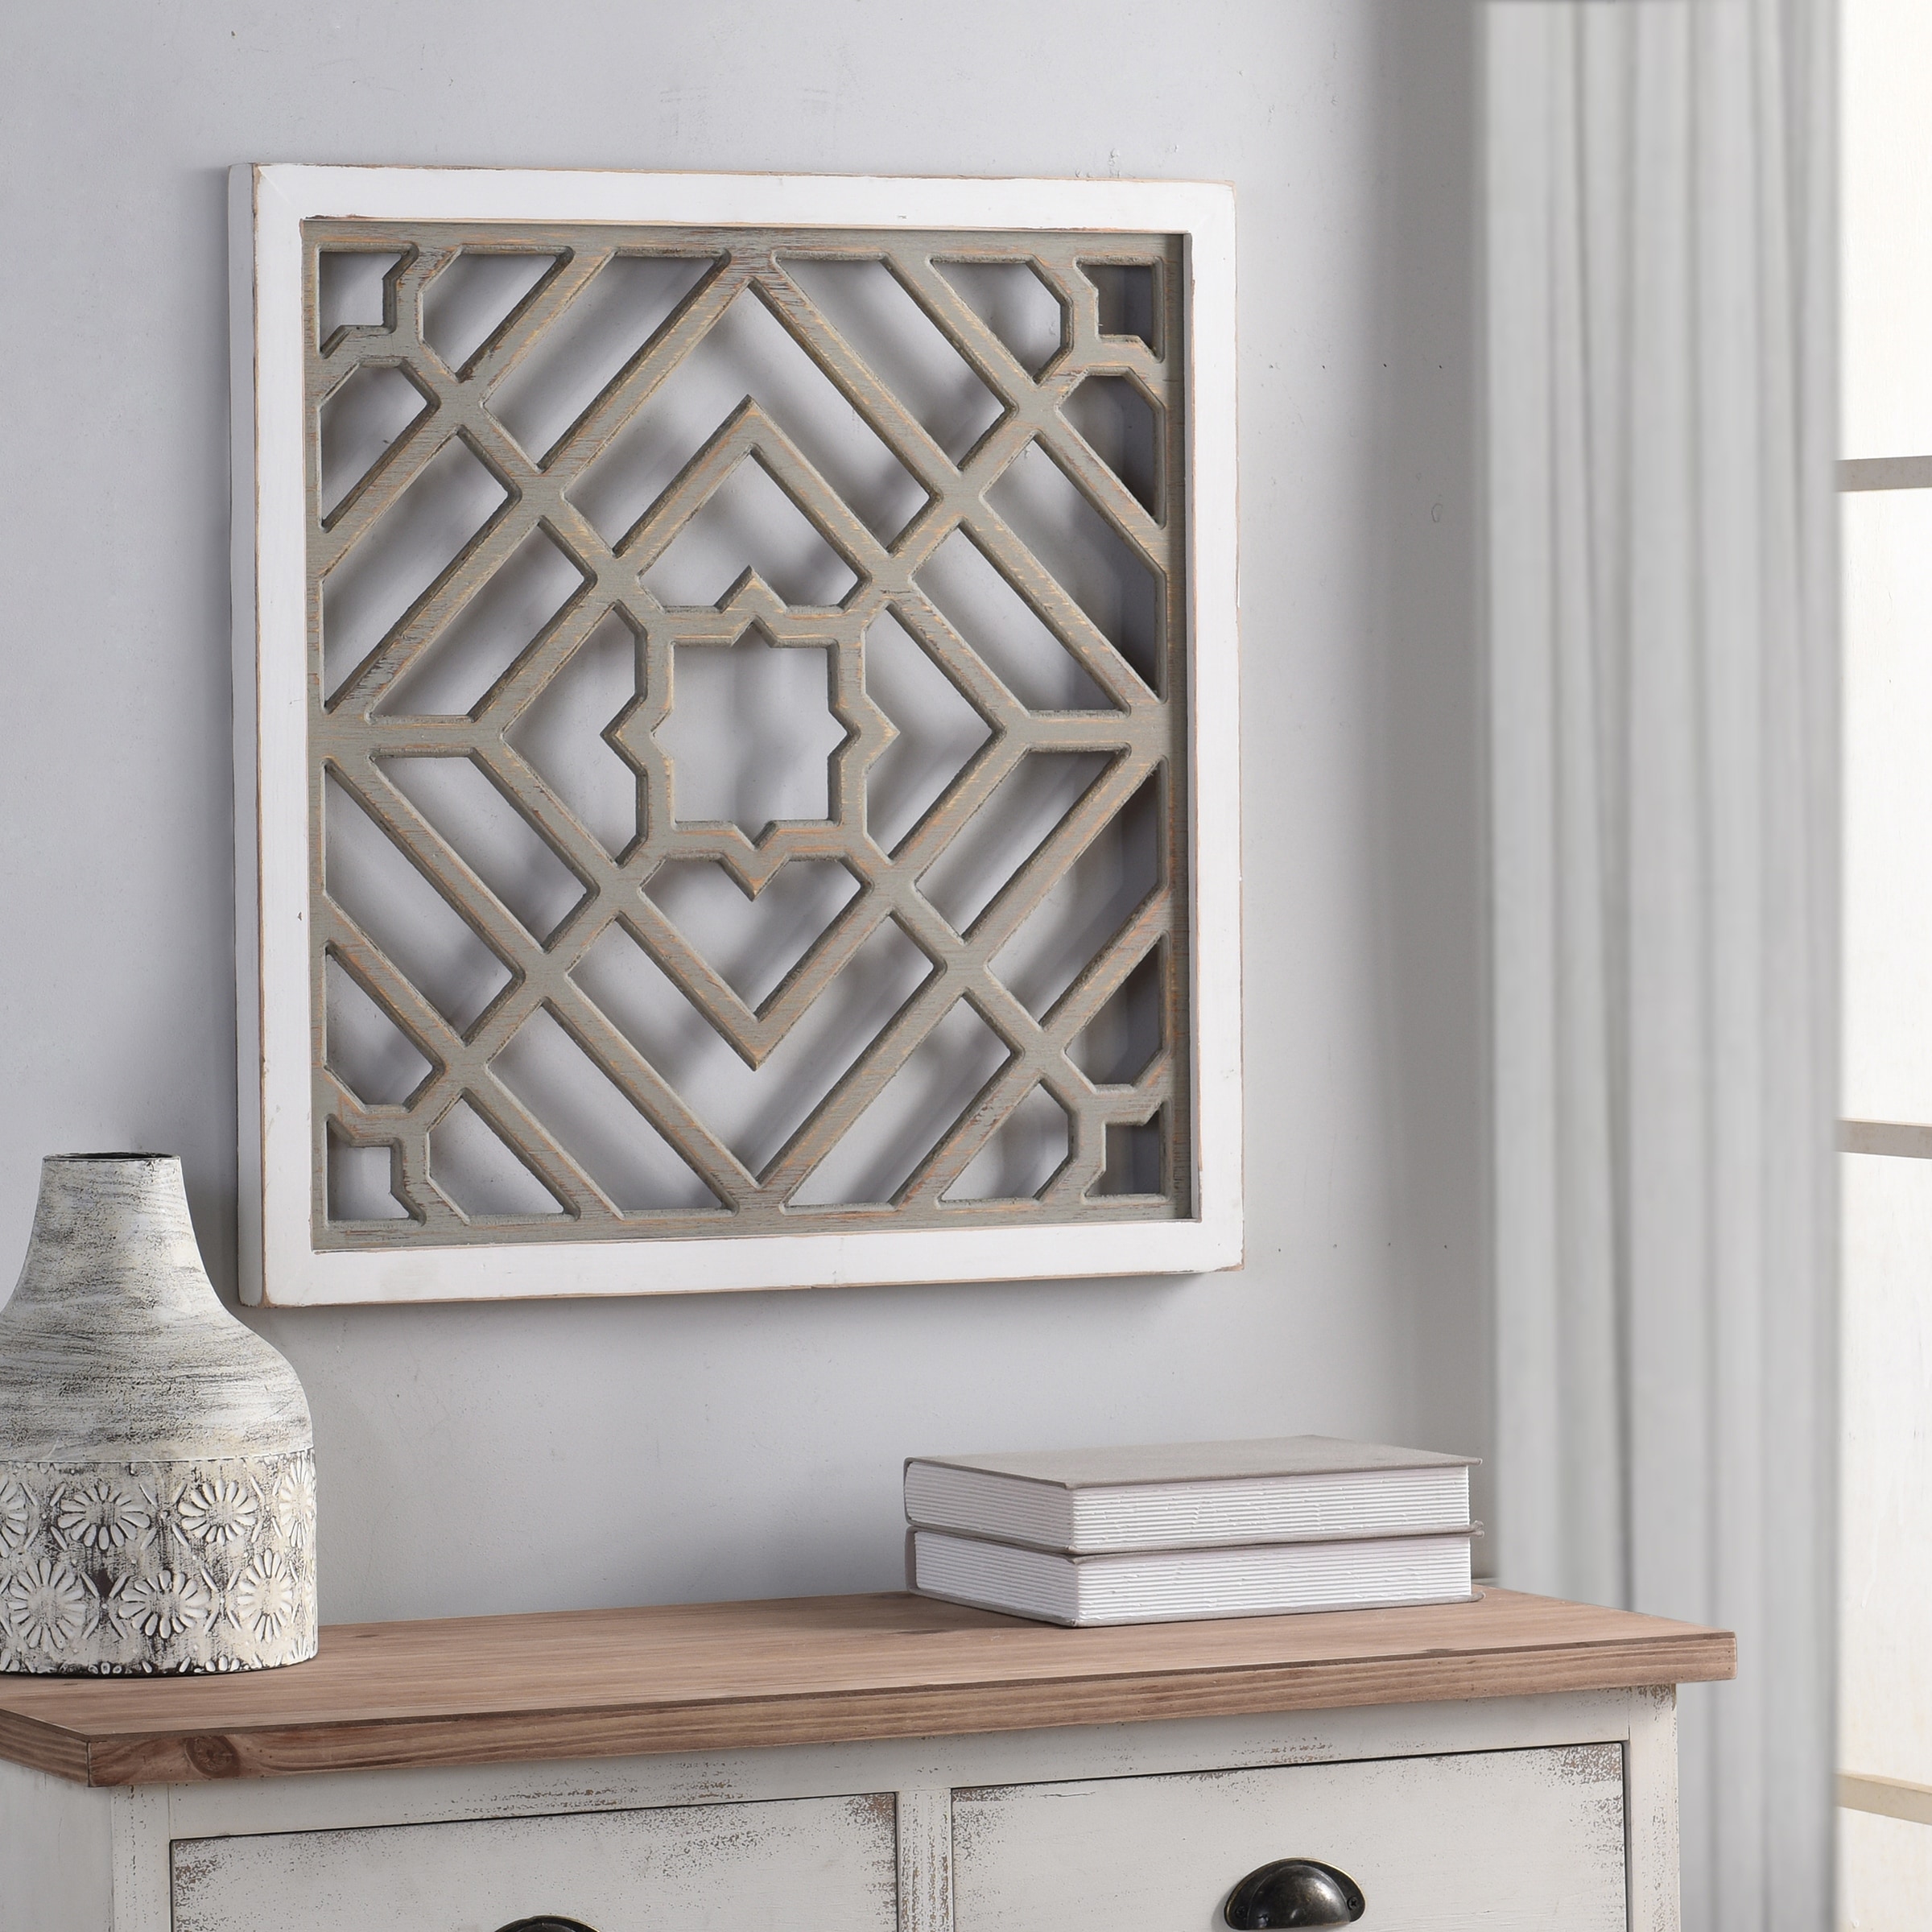 https://ak1.ostkcdn.com/images/products/is/images/direct/278f66b006d7a5c1607e49353db7910daa008ed4/Weathered-White-Square-Pattern-Wood-Wall-Art.jpg